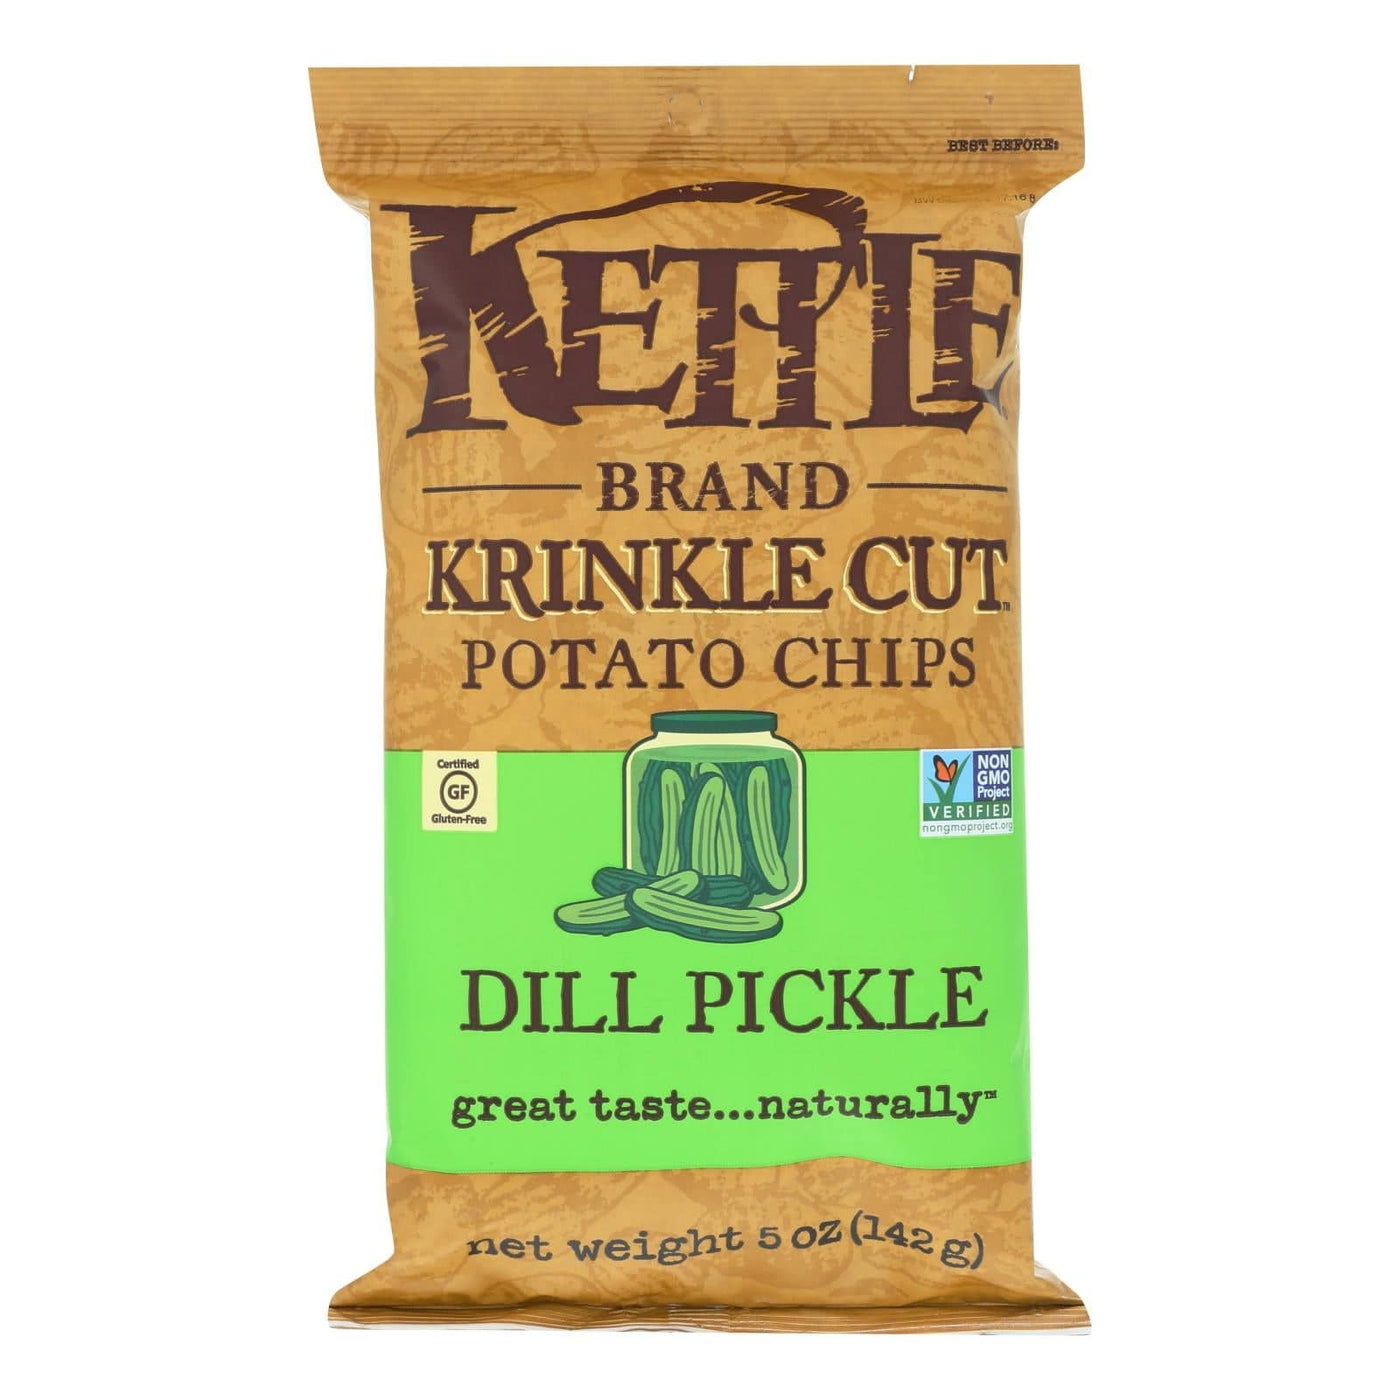 Kettle Brand Krinkle Cut Potato Chips - Dill Pickle - Case Of 15 - 5 Oz. | OnlyNaturals.us